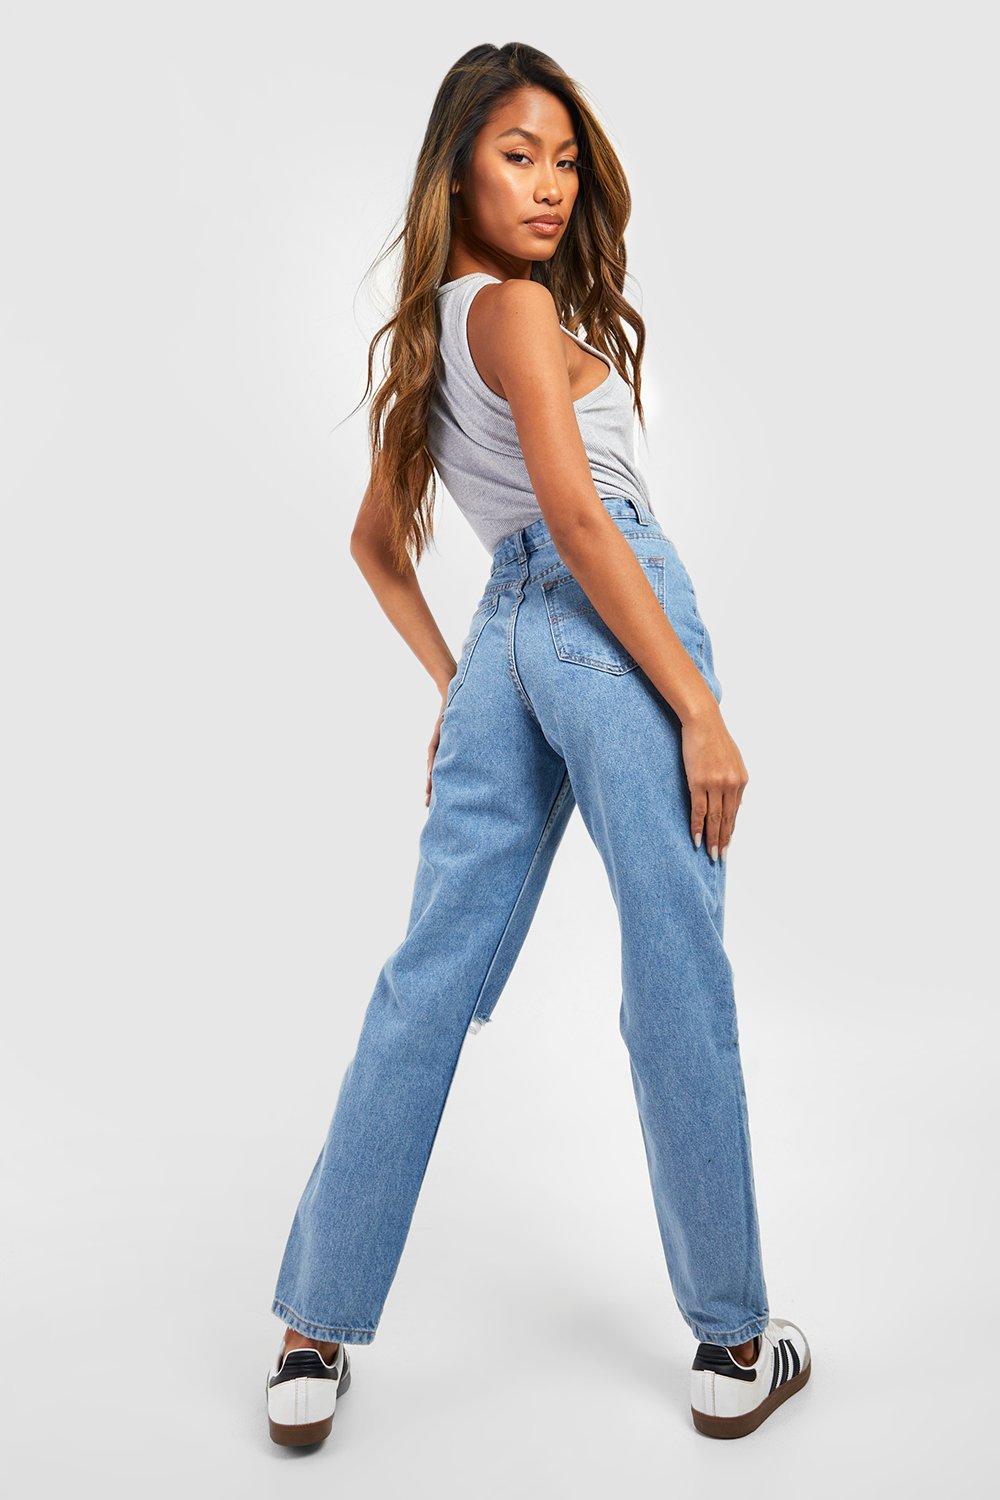 ONESO Women's High Waisted Mom Jeans Stretchy Ripped Destroyed